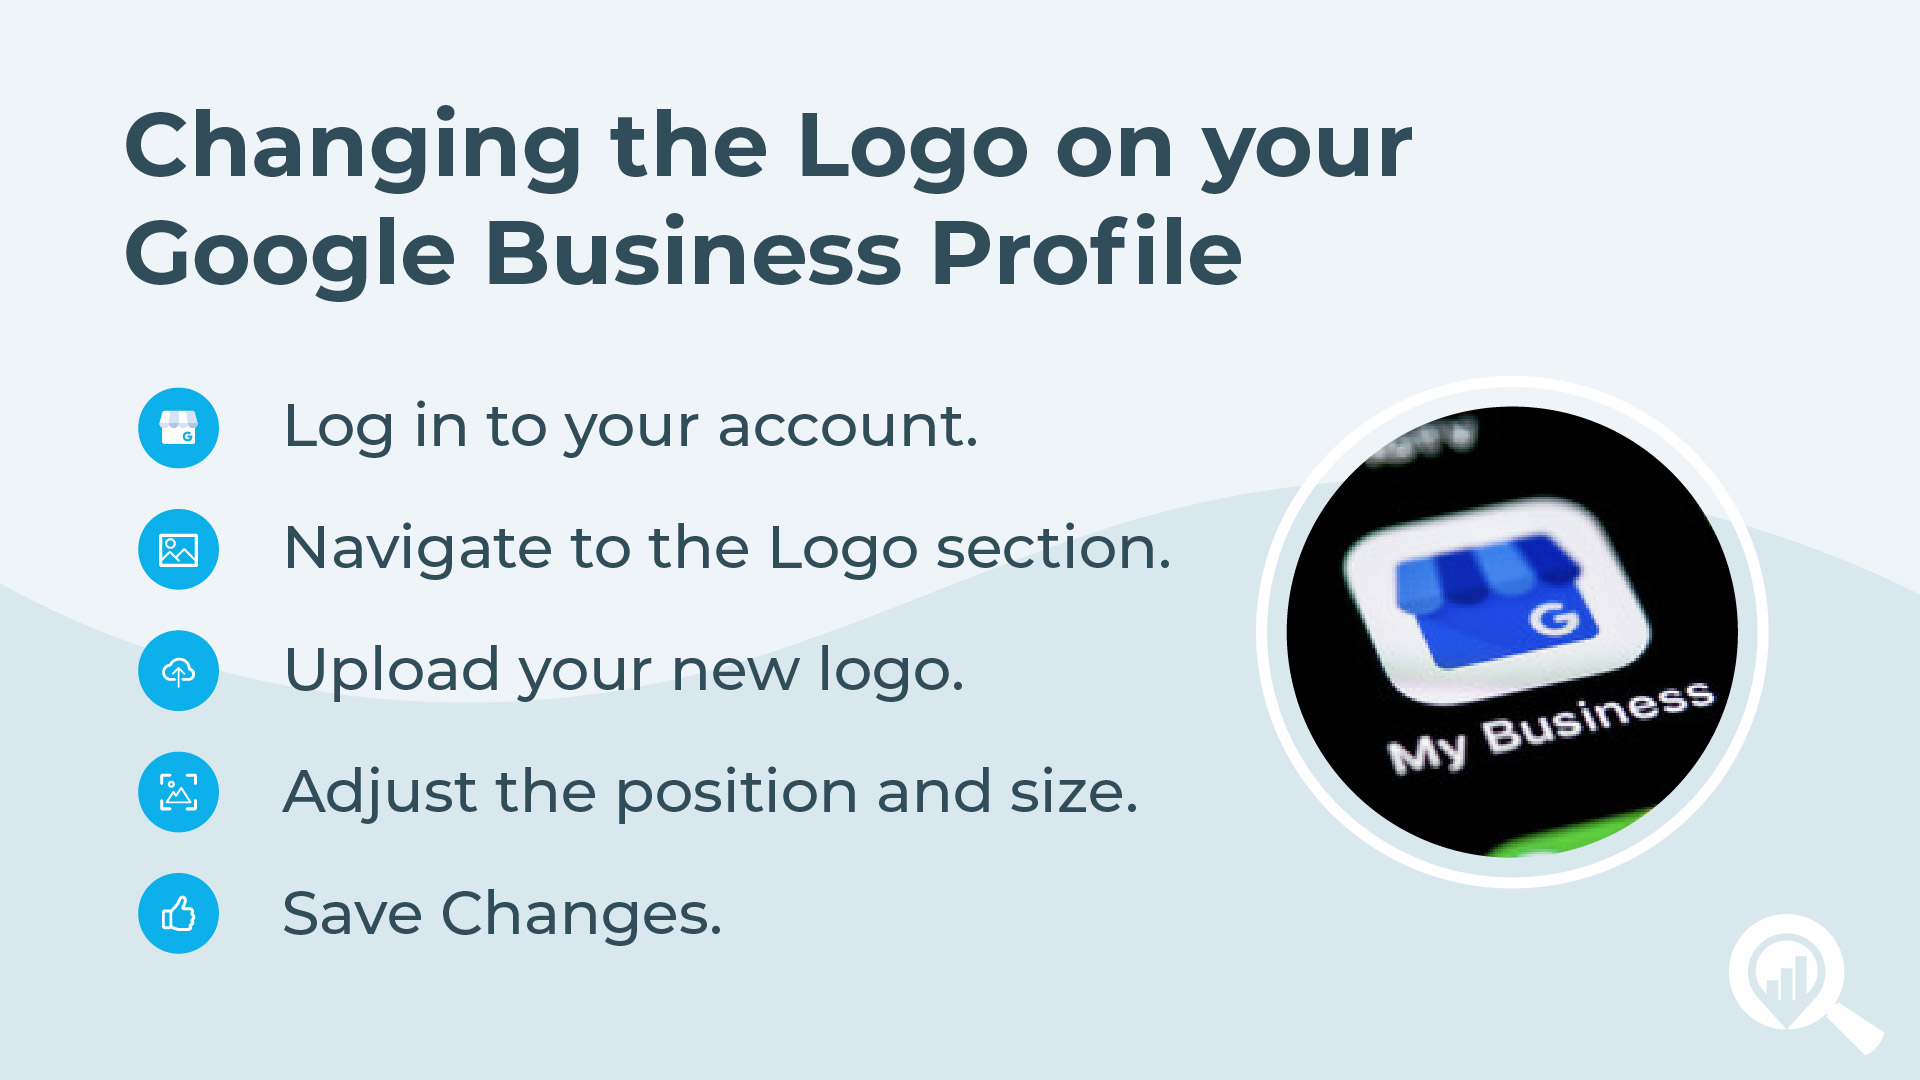 How to Change the Logo on your Google Business Profile Step By Step